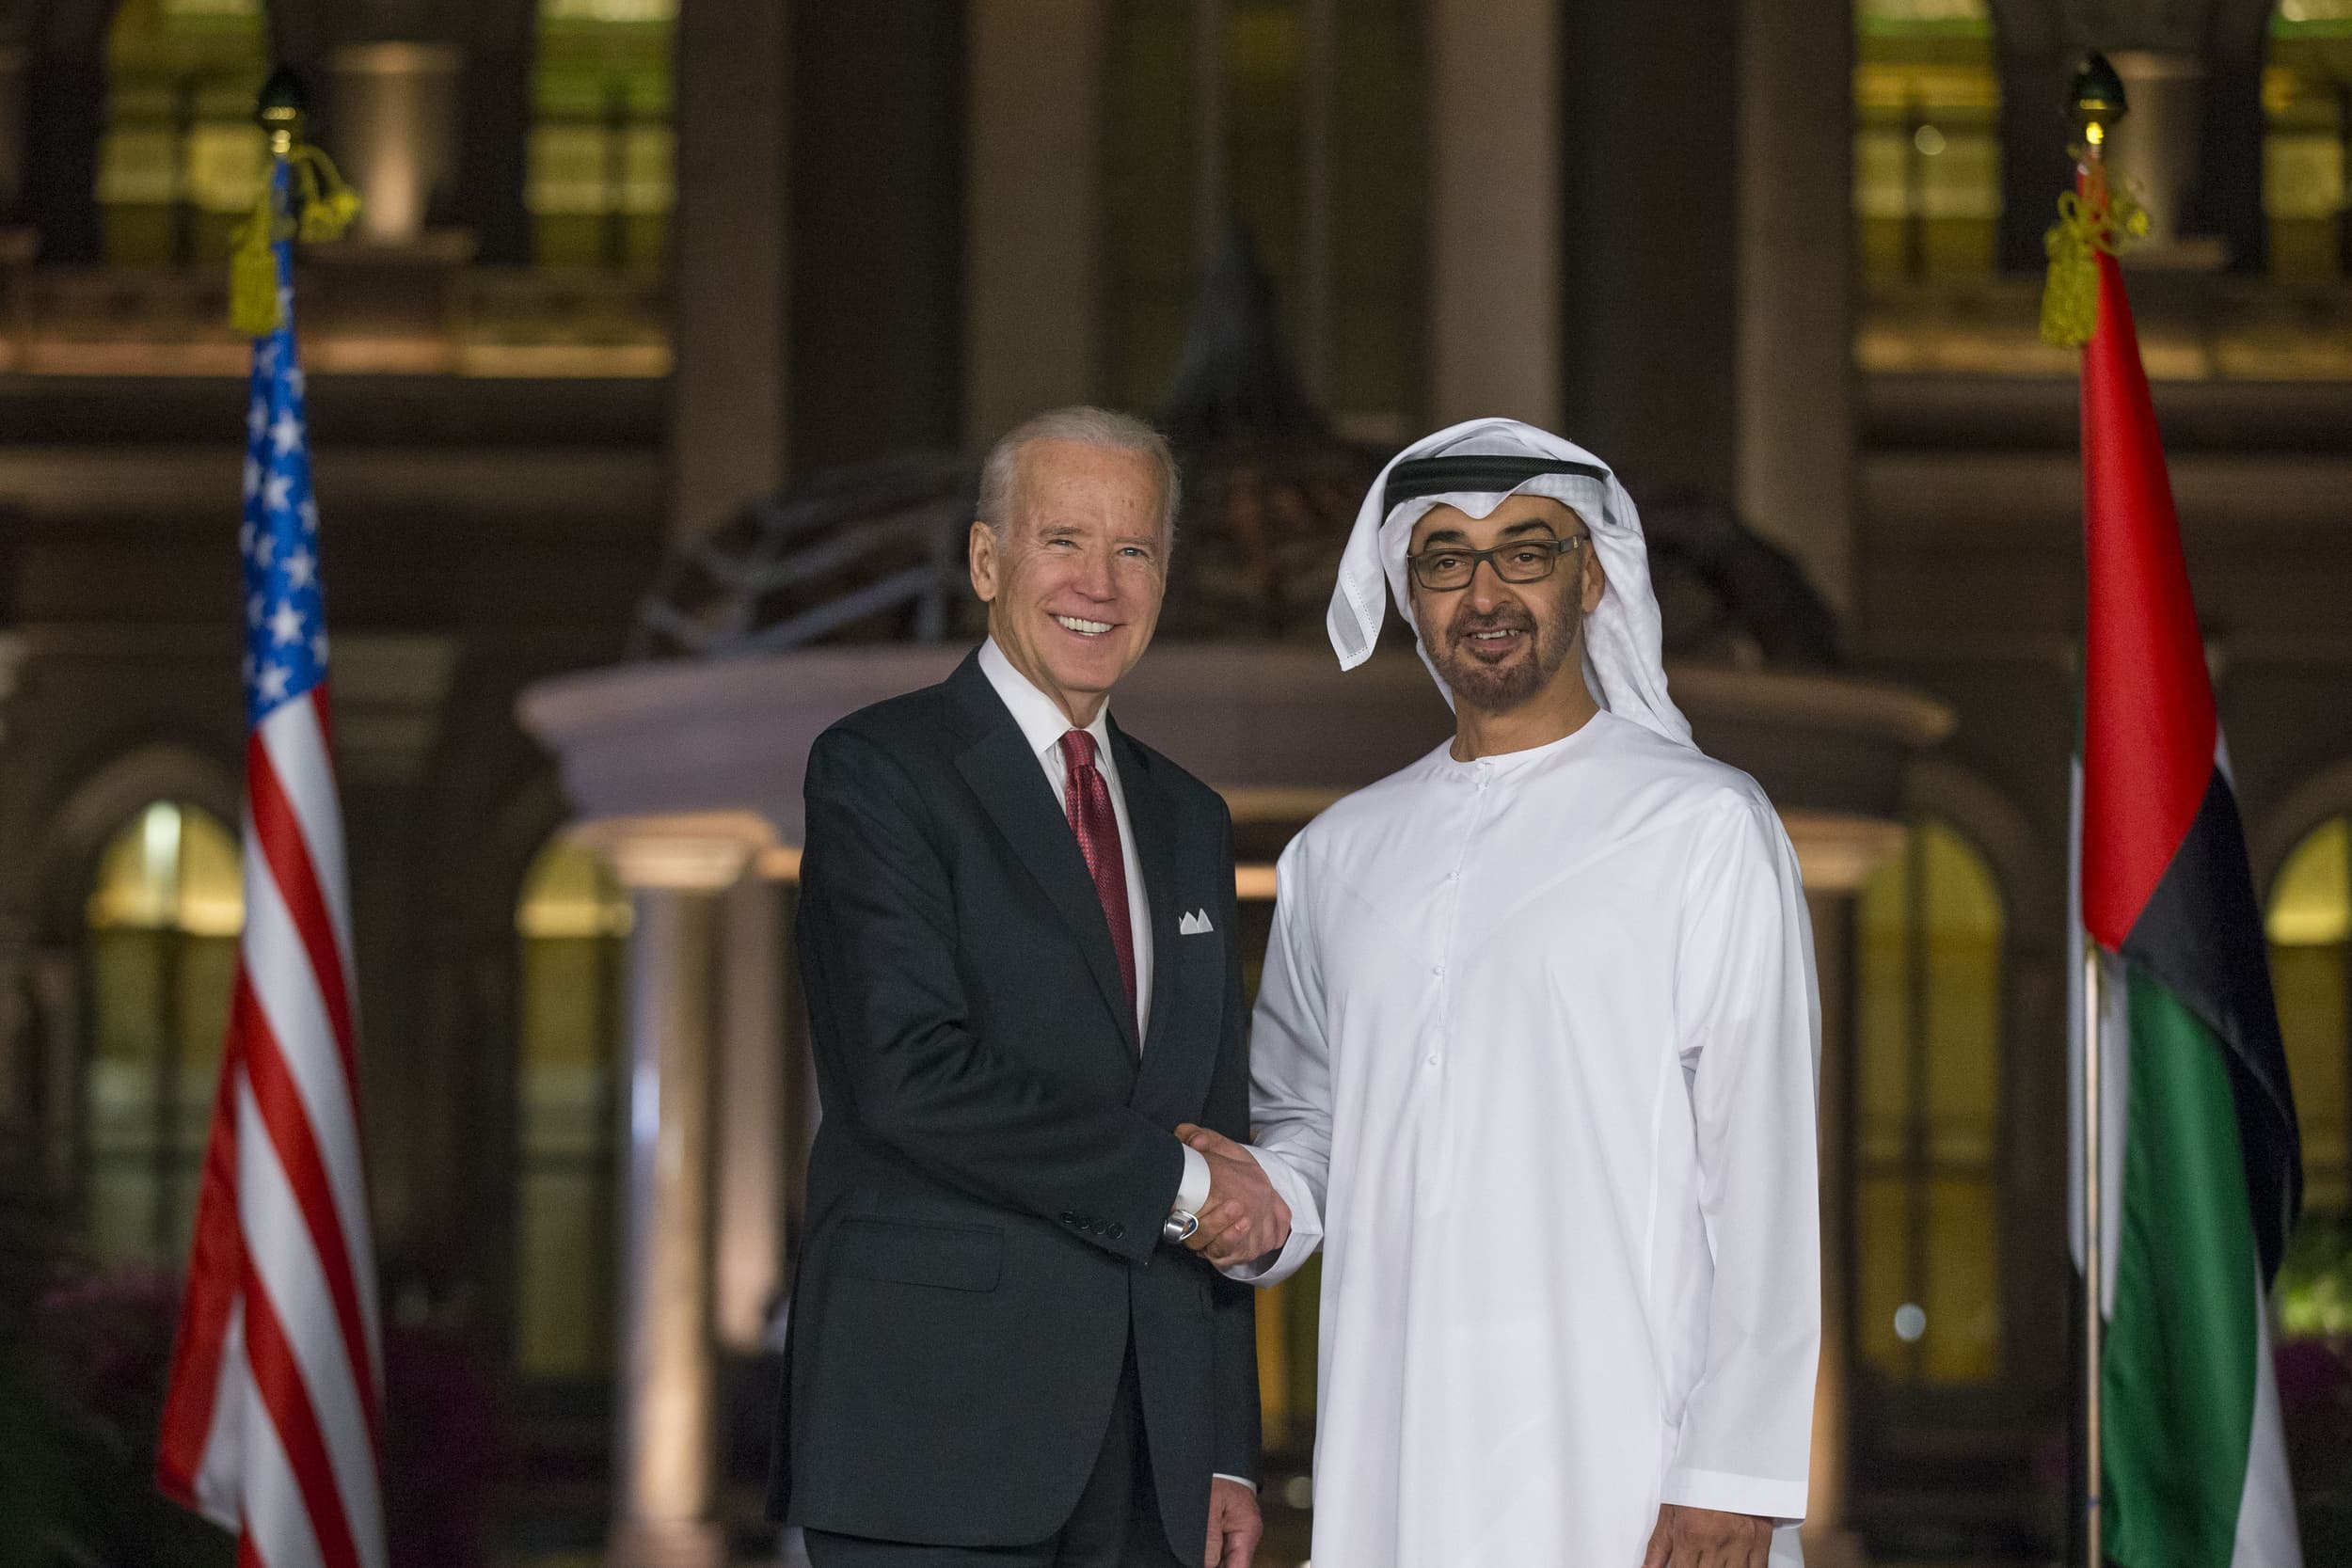 United States Vice President Joe Biden (pictured with His Highness Sheikh Mohamed bin Zayed Al Nahyan, Crown Prince of Abu Dhabi) conducted a two-day visit to the UAE, which underscored the strong bilateral relationship between the two countries. During the visit, the US Vice President called the bond between the UAE and US "one of the most significant in the region" and highlighted the UAE's role in the fight against ISIL and extremism. 